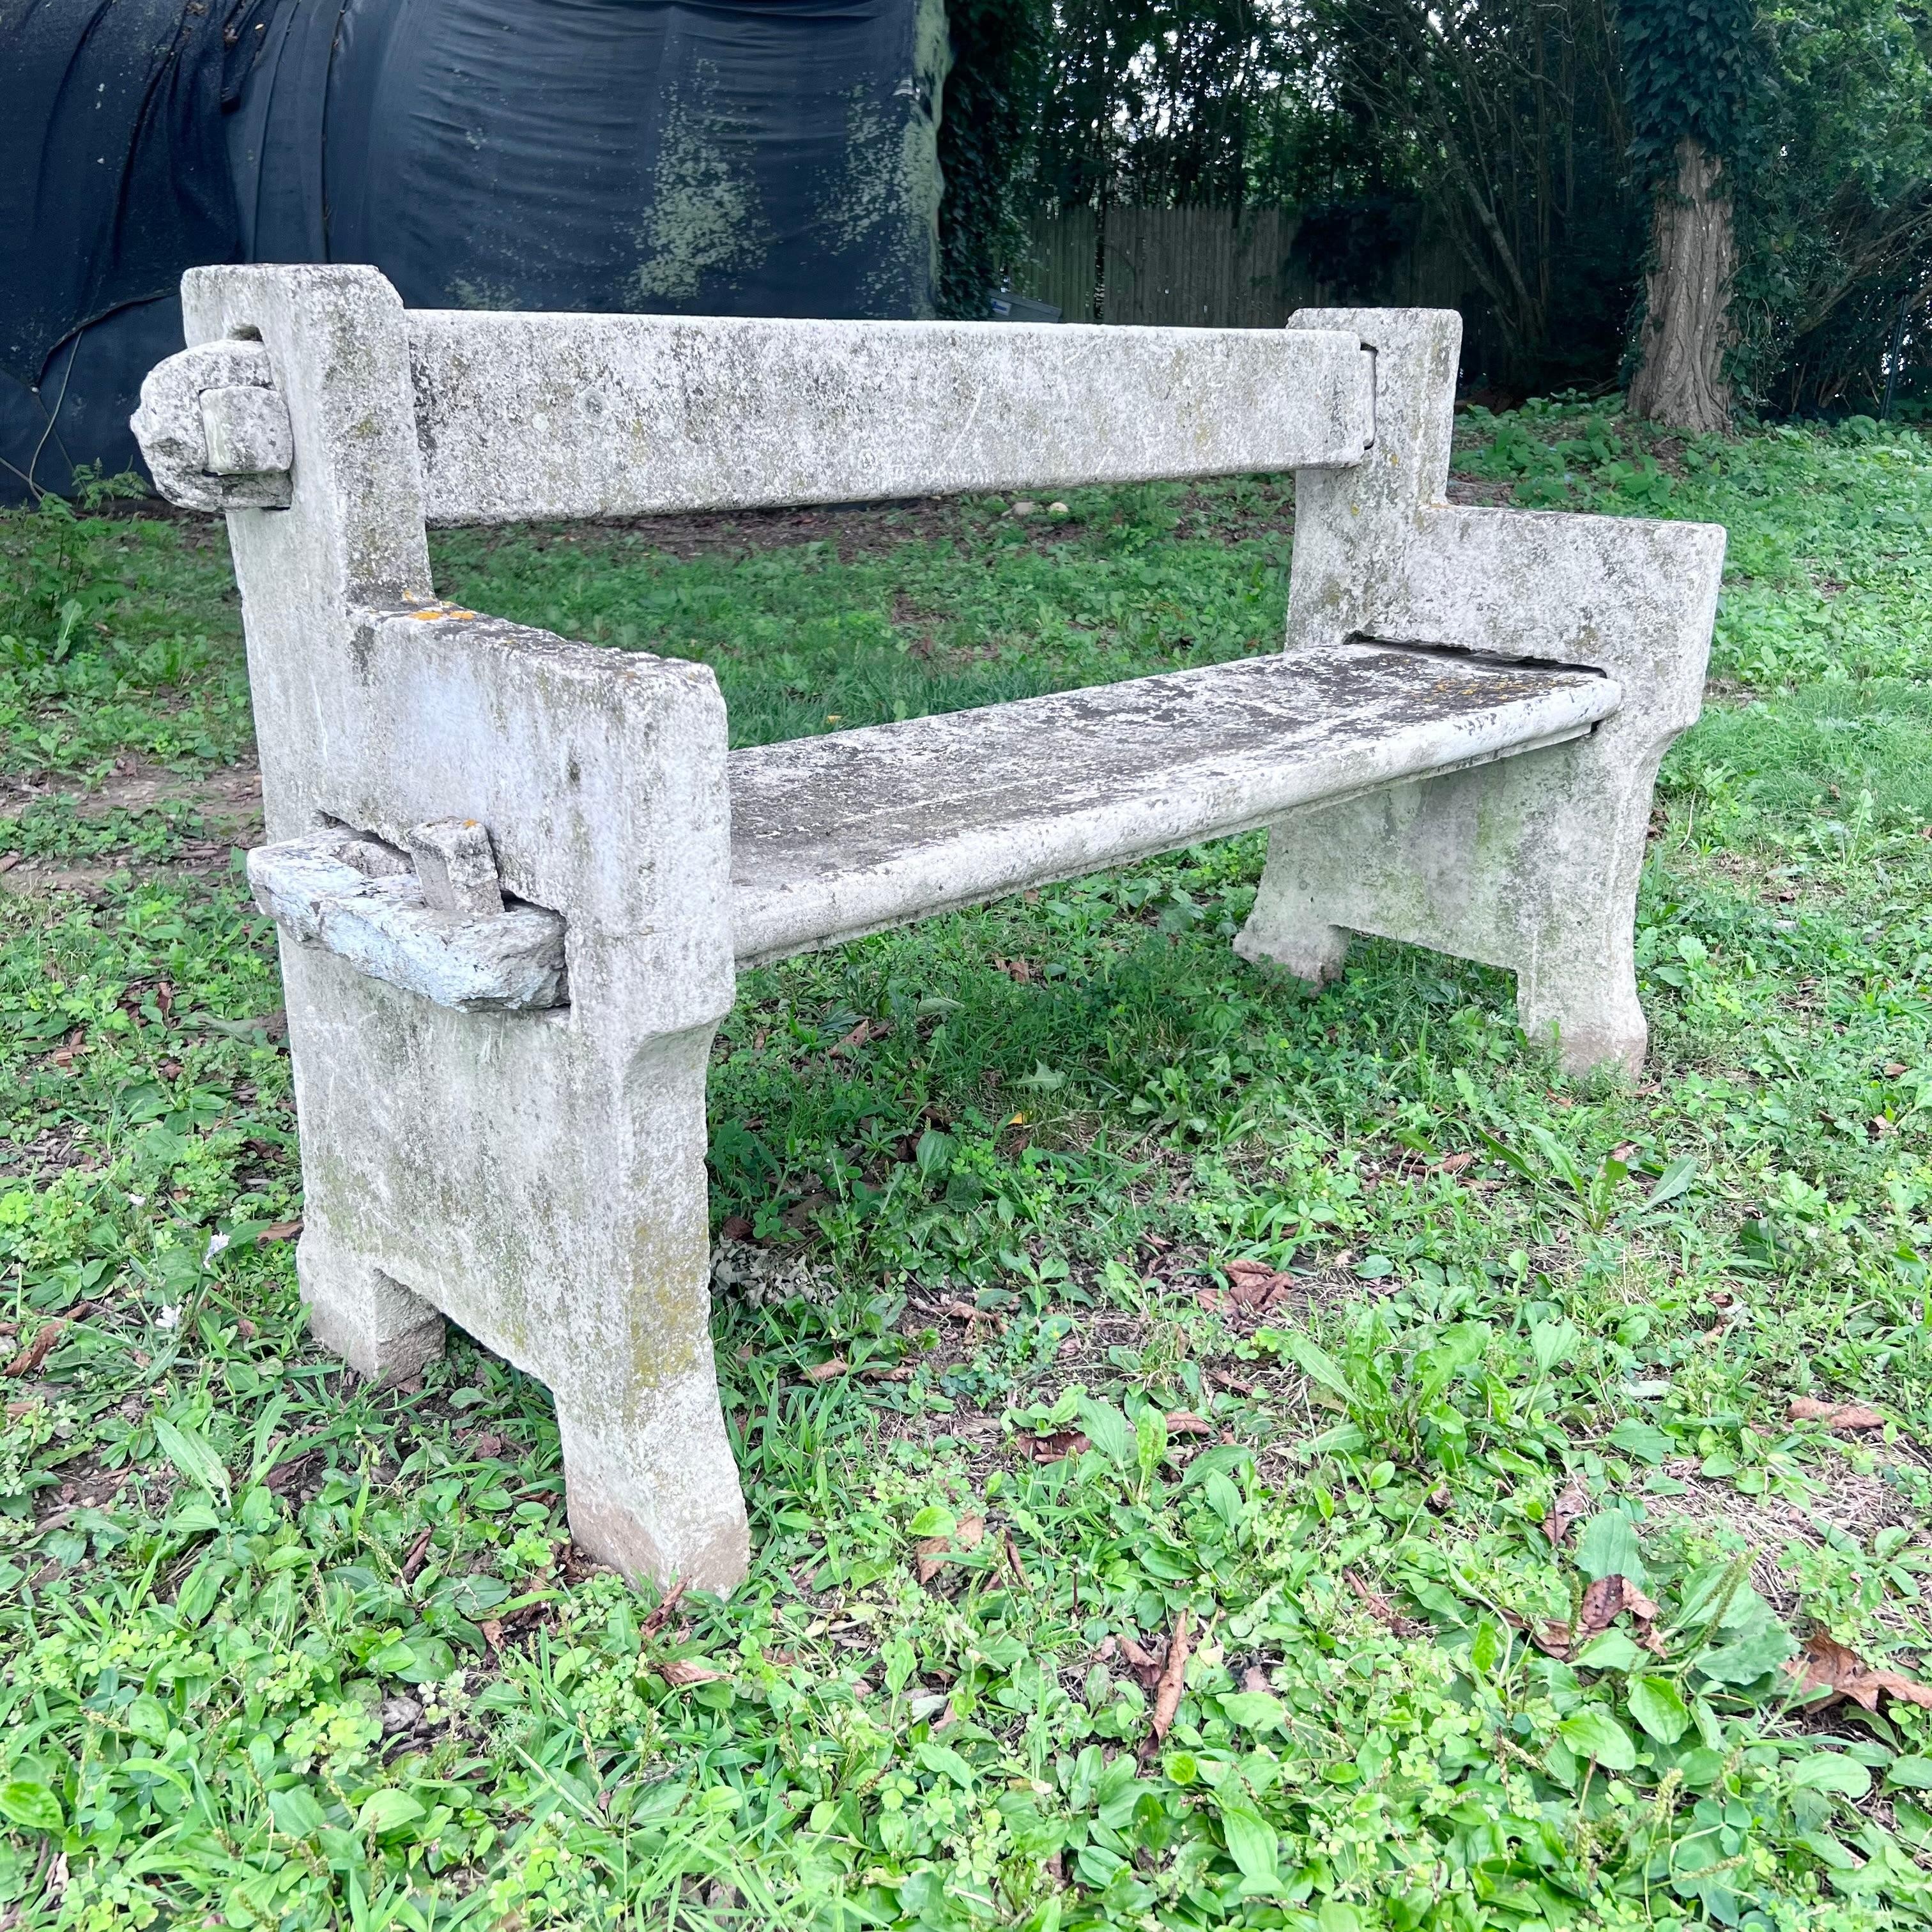 Wonderful vintage interlocking concrete bench from France, circa 1950s. Four separate components make up the bench, which all interlock with each other. Years of European weather has given this bench a gorgeous patina, interspersed with lichen. A